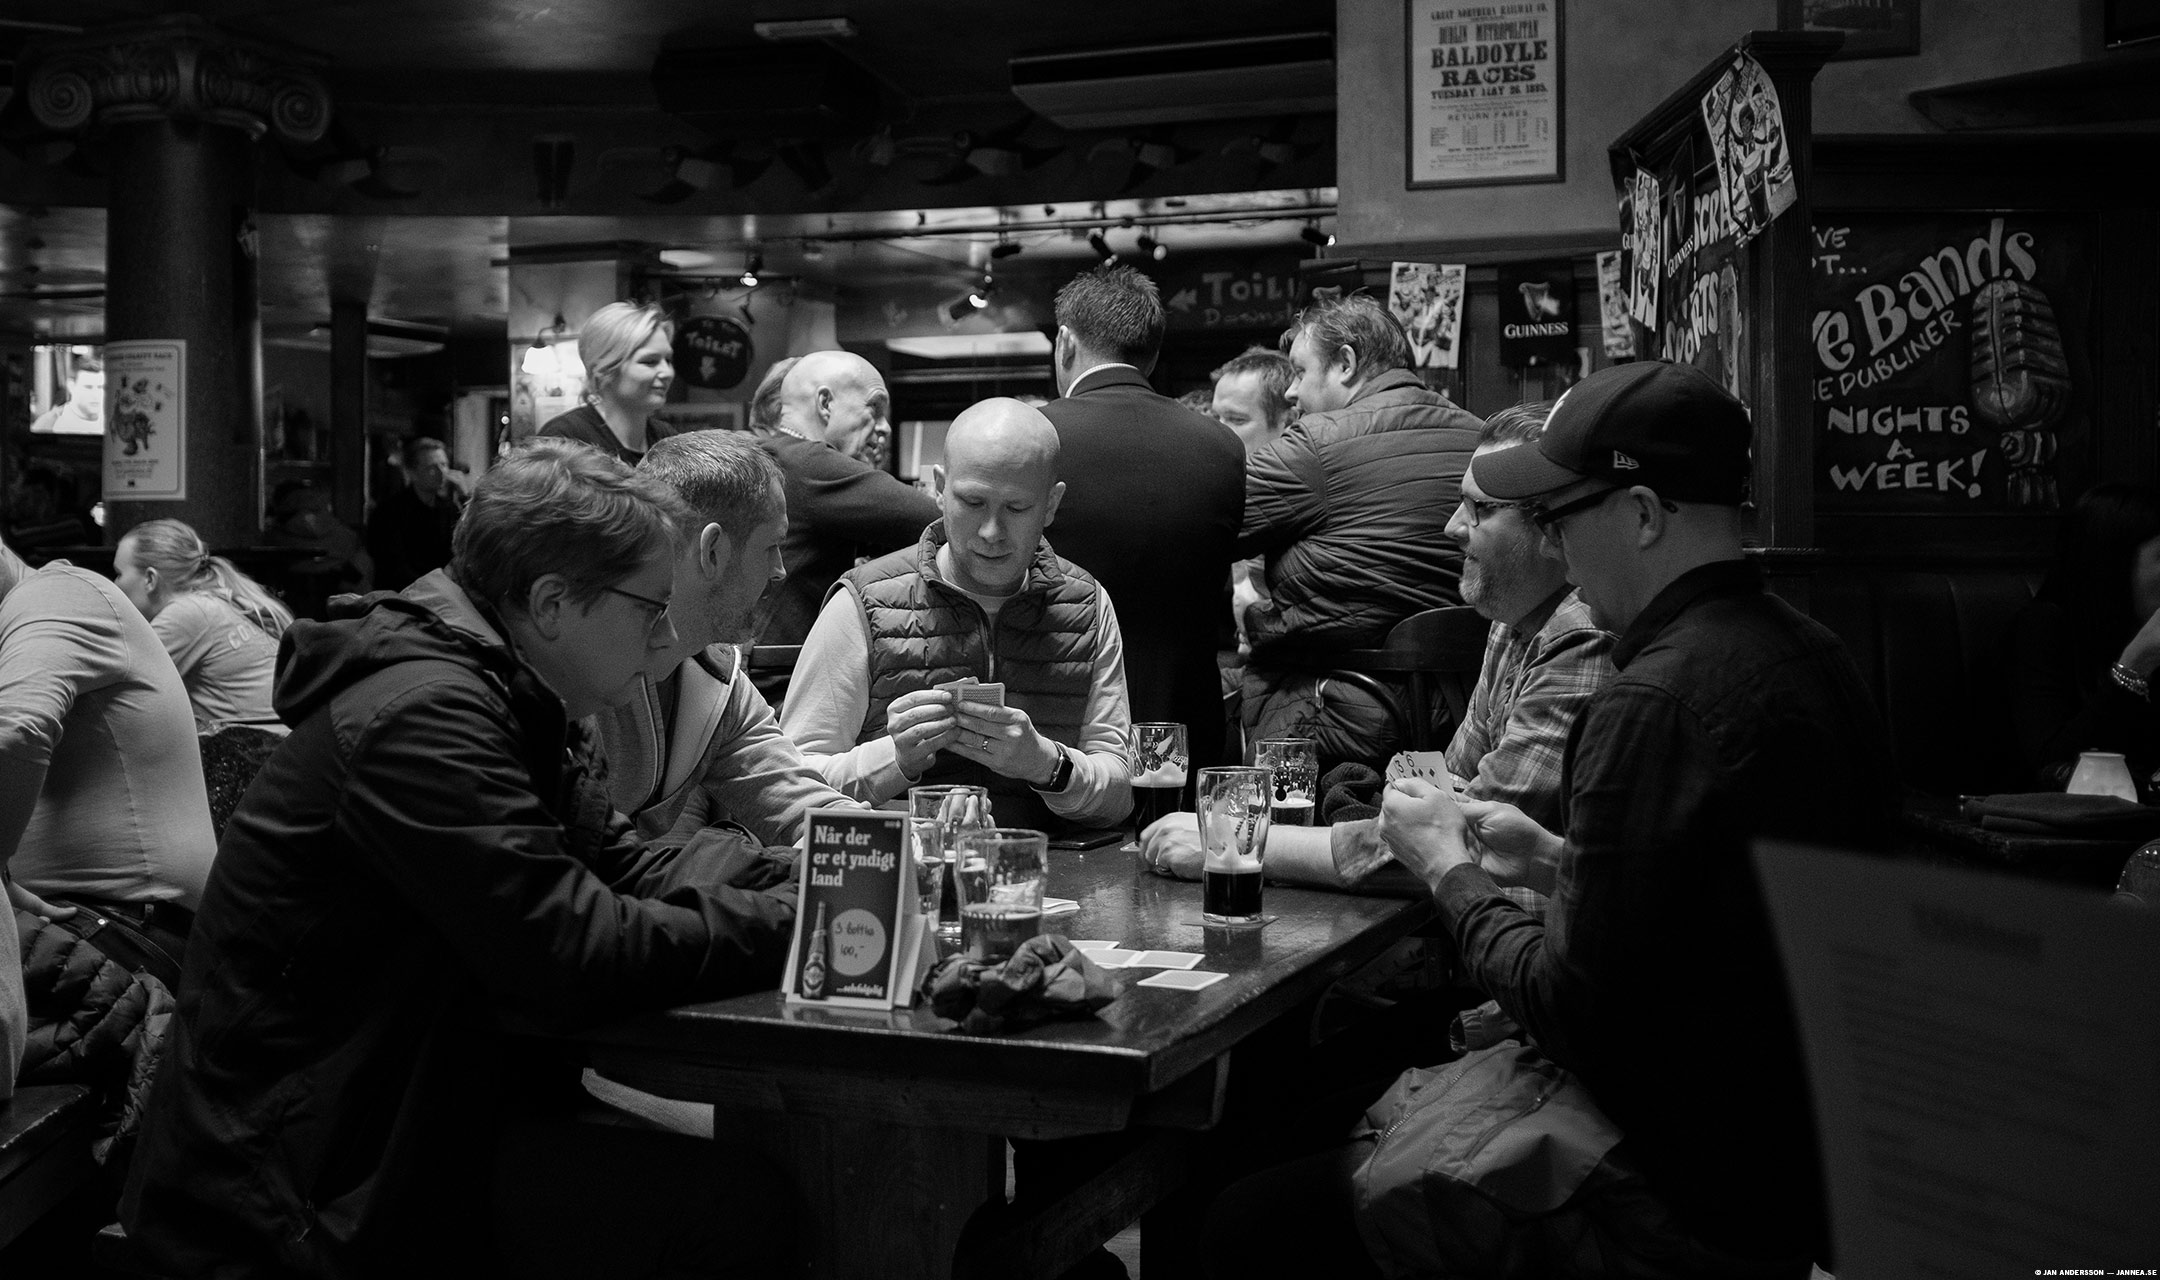 Game of cards at the Irish pub | © Jan Andersson